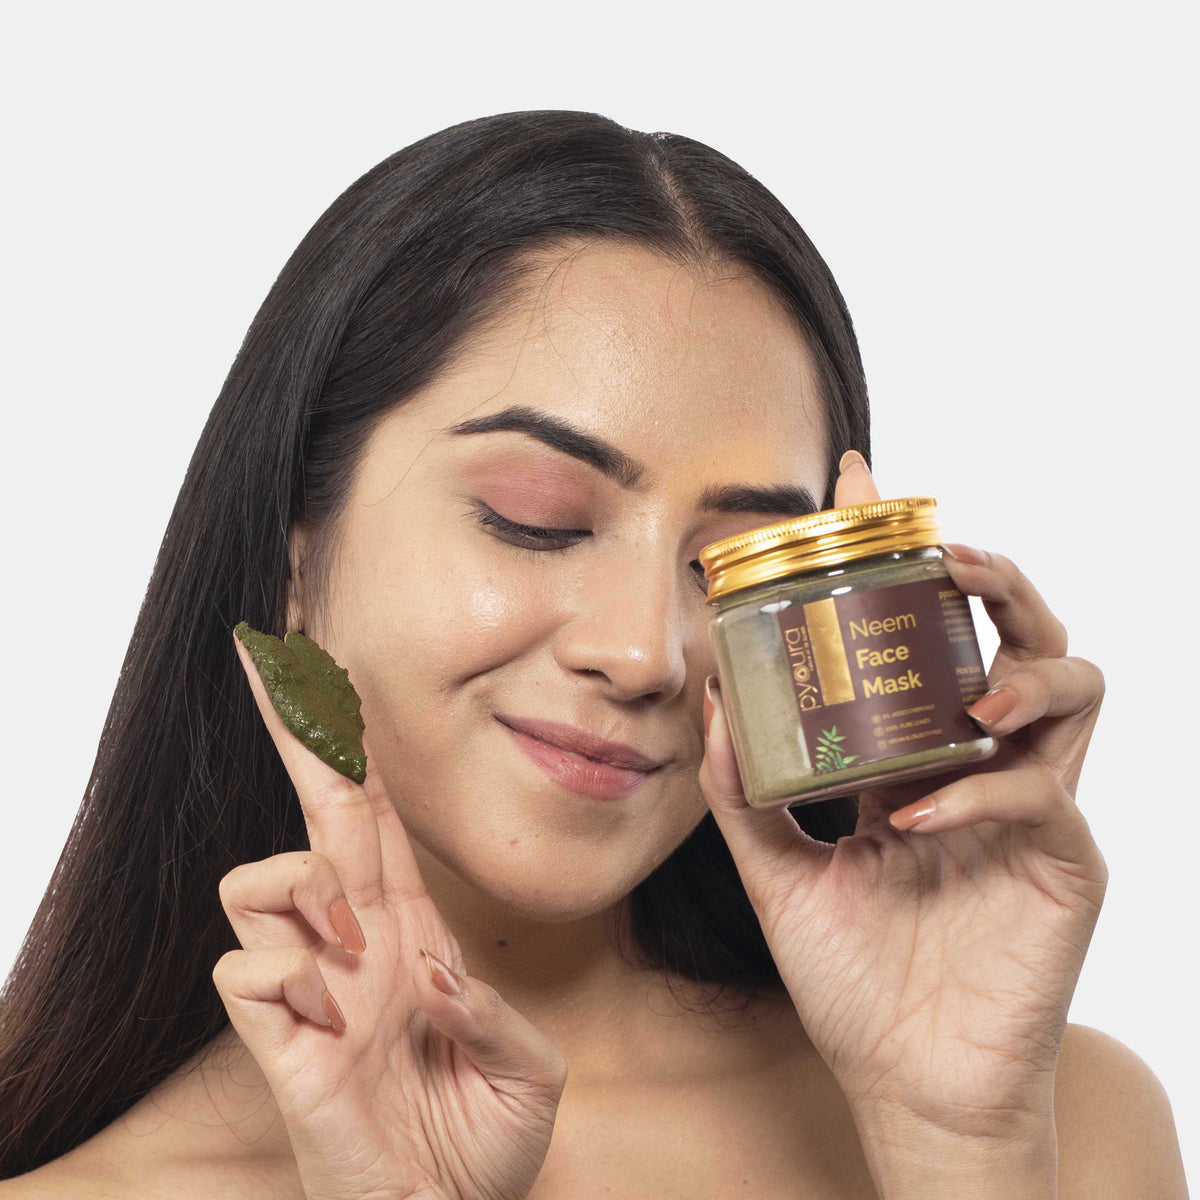 Neem Face Mask <h4>The anti-bacterial power of neem for clear skin<h4><h6> Hygienically dried to preserve the skin caring actives.  No preservatives added.<h6>